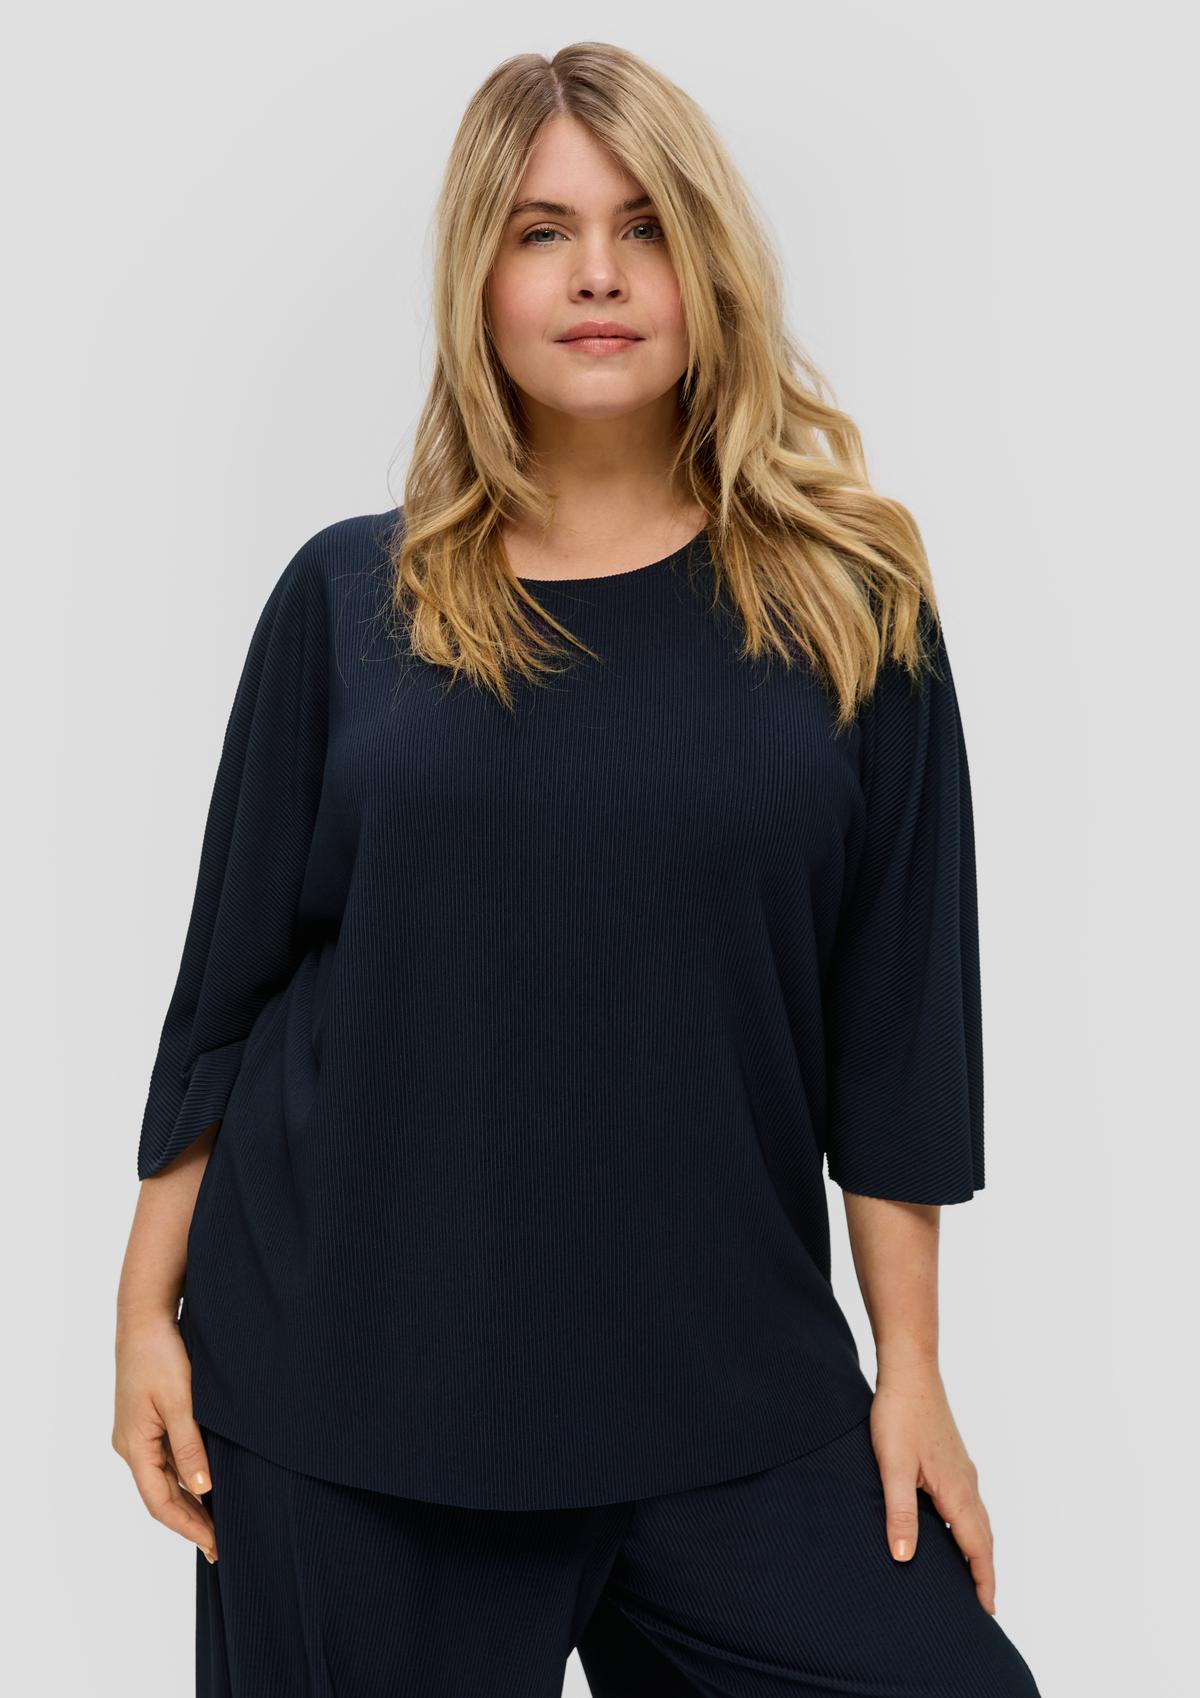 Pleated jersey top